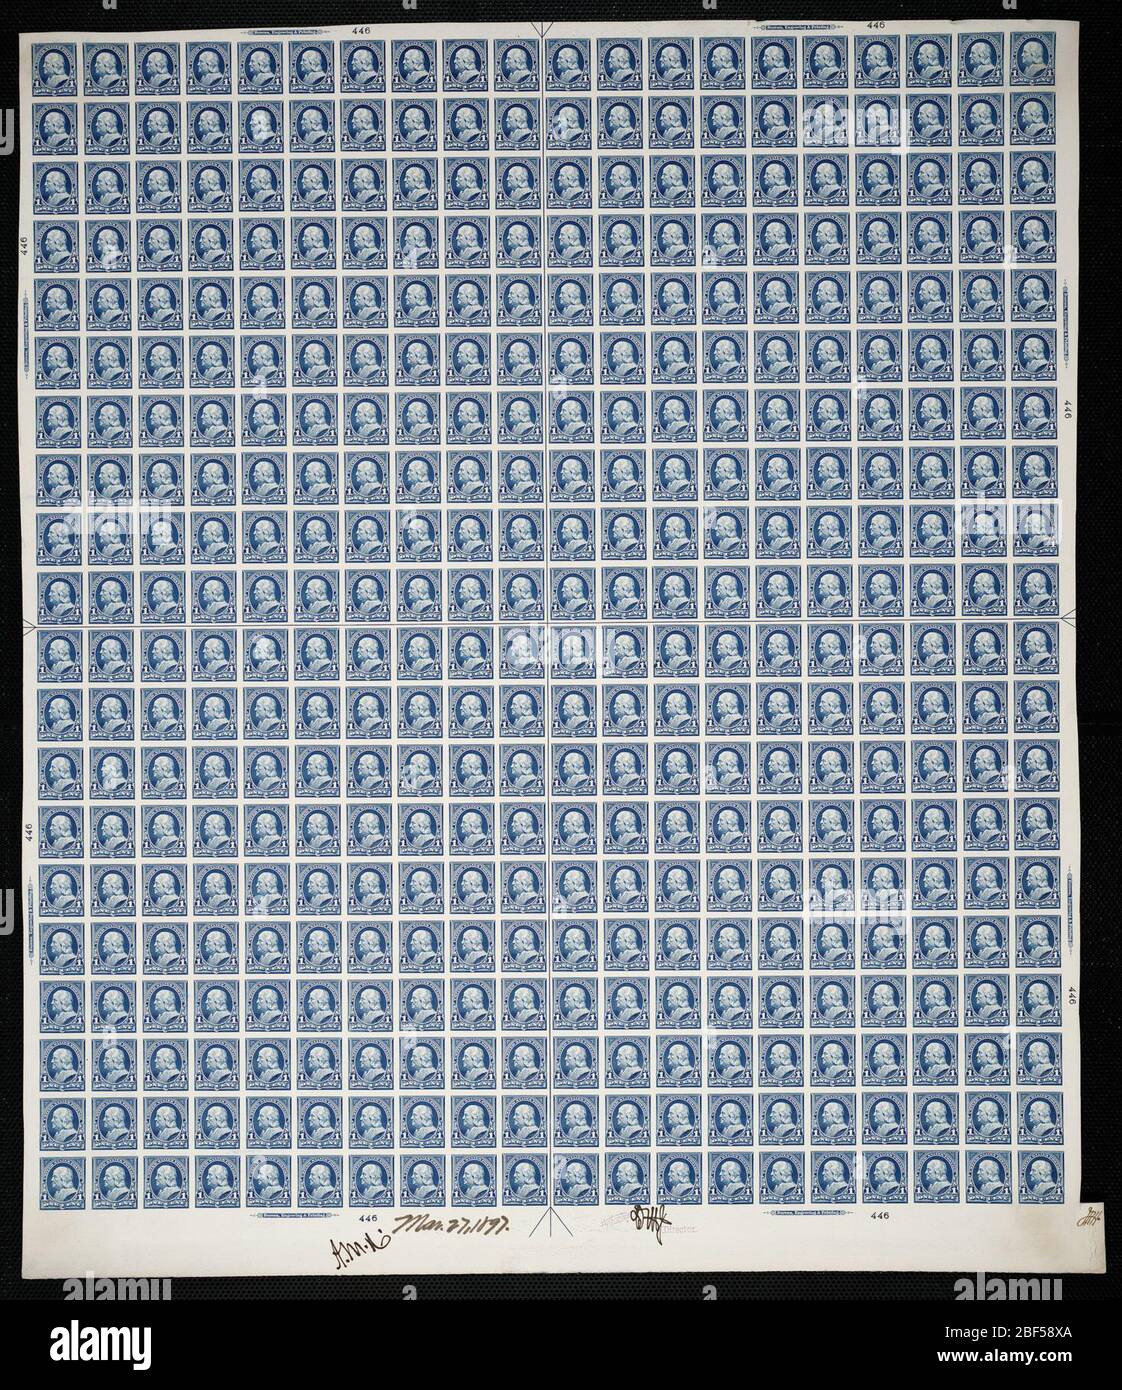 1c Franklin plate proof. Certified plate proofs are the last printed proof of the plate before printing the stamps at the Bureau of Engraving and Printing. These plate proofs are each unique, with the approval signatures and date. Stock Photo